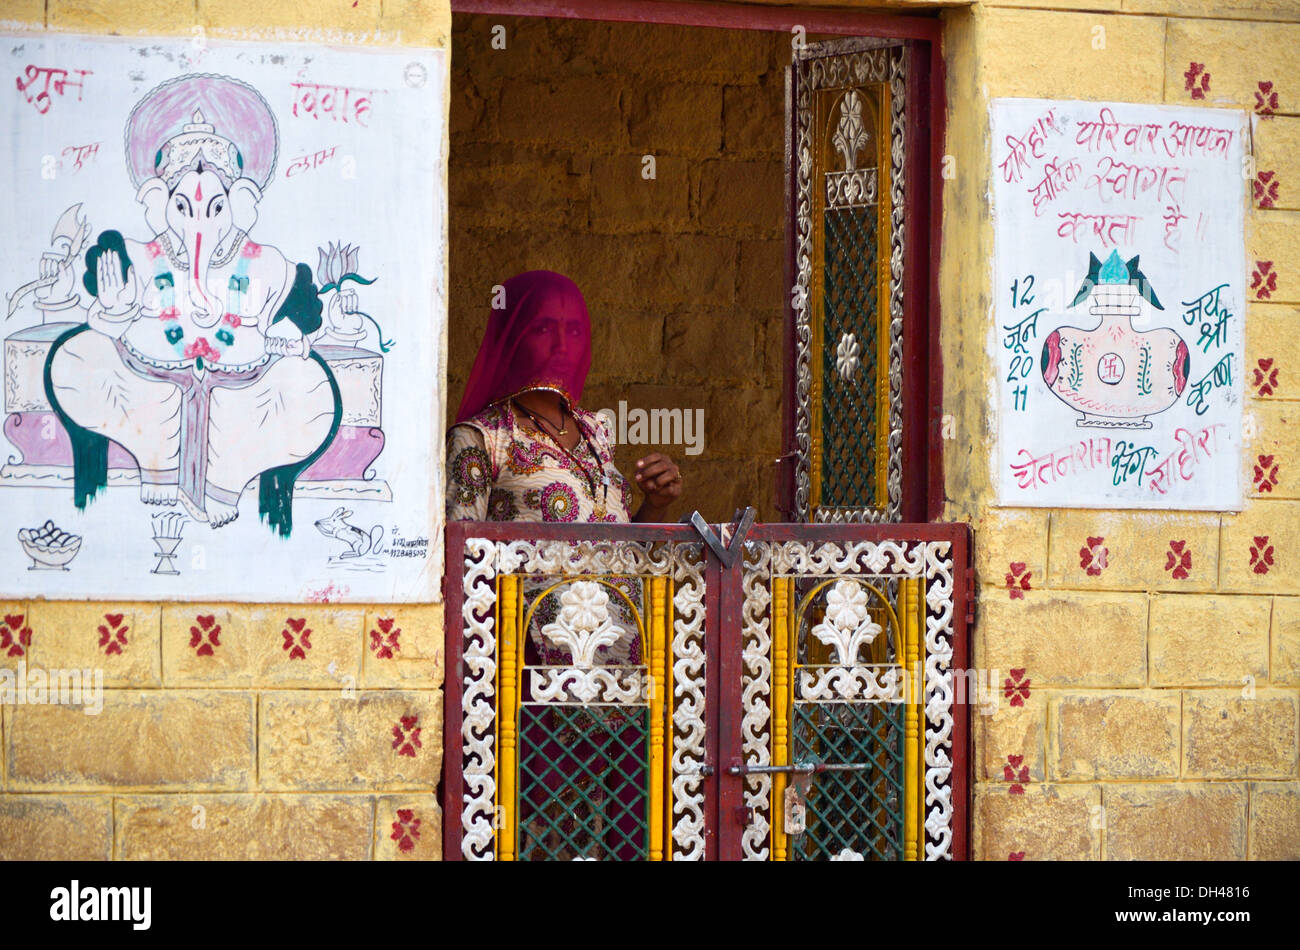 Woman in veil standing inside the gate of house with painted walls Rajasthan India Asia Stock Photo